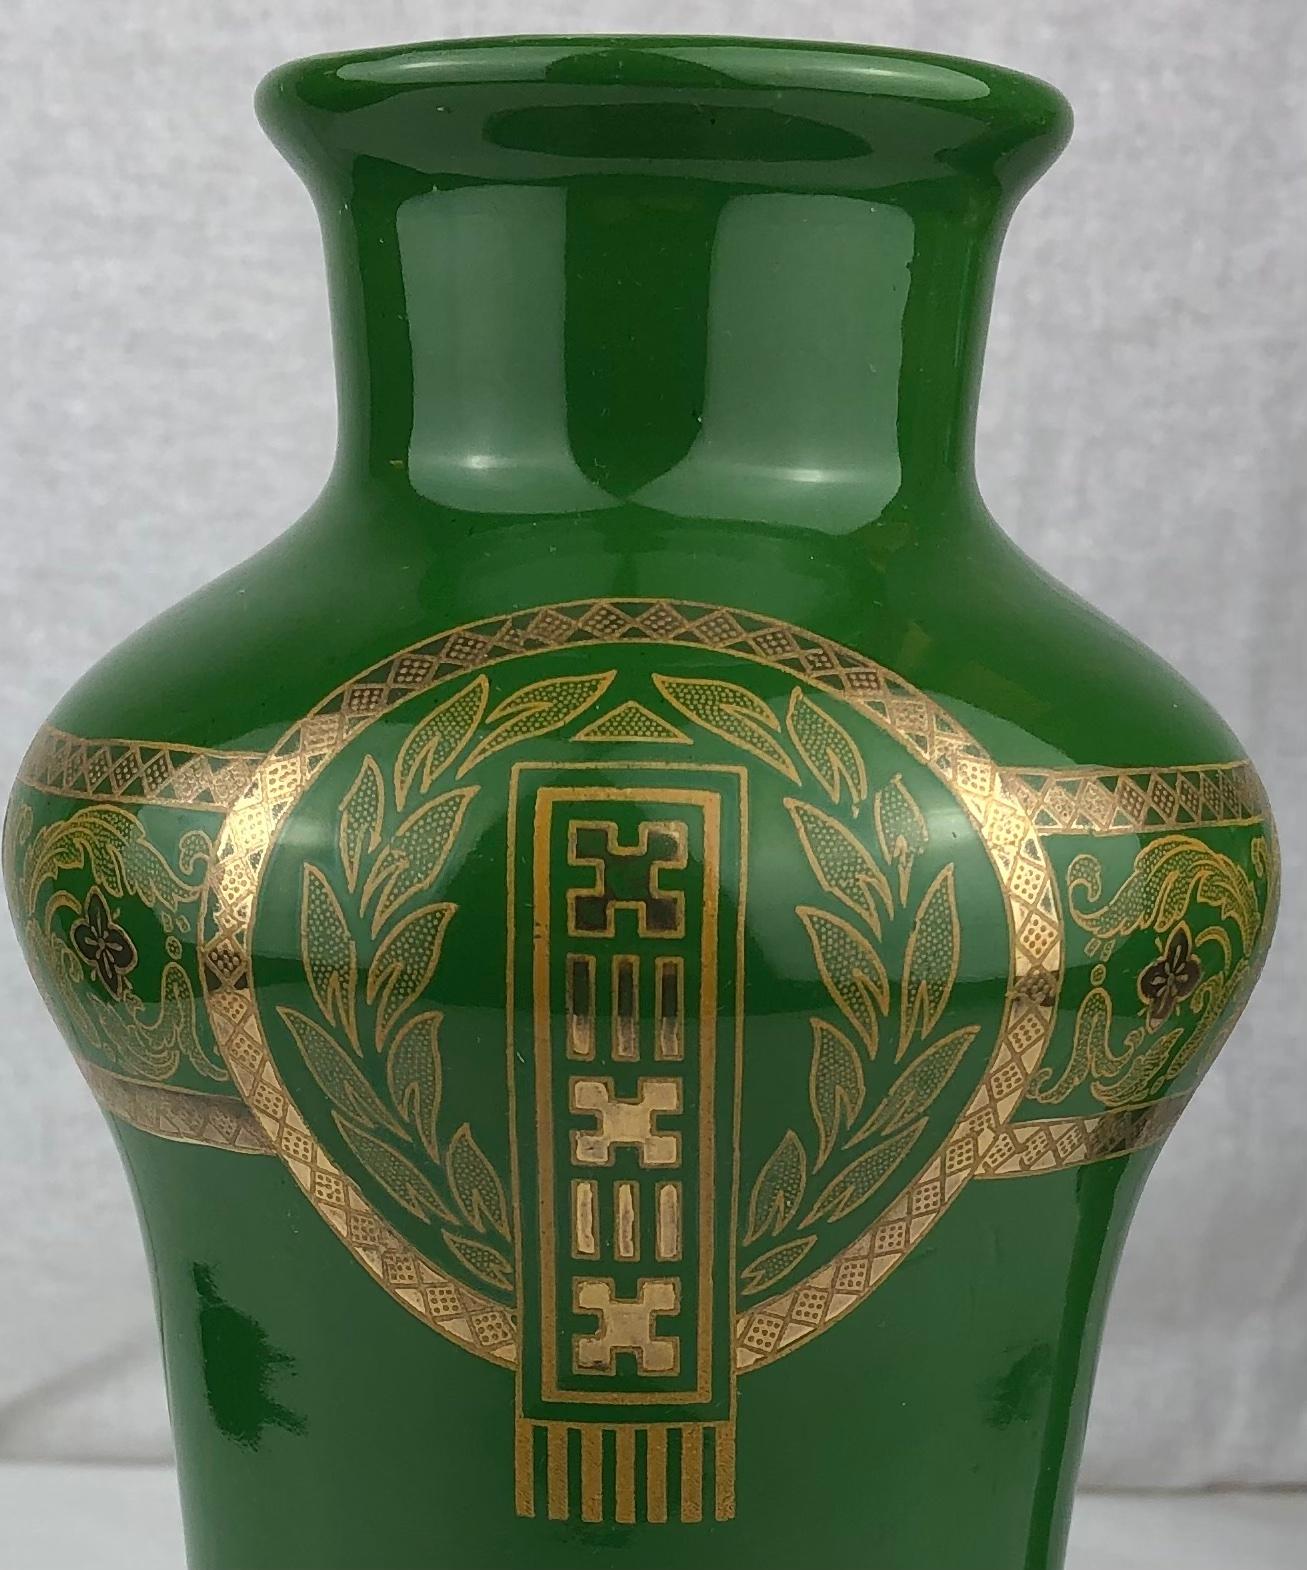 Pair of French Art Deco Porcelain Vases by Sarreguemines Green & Gold For Sale 2